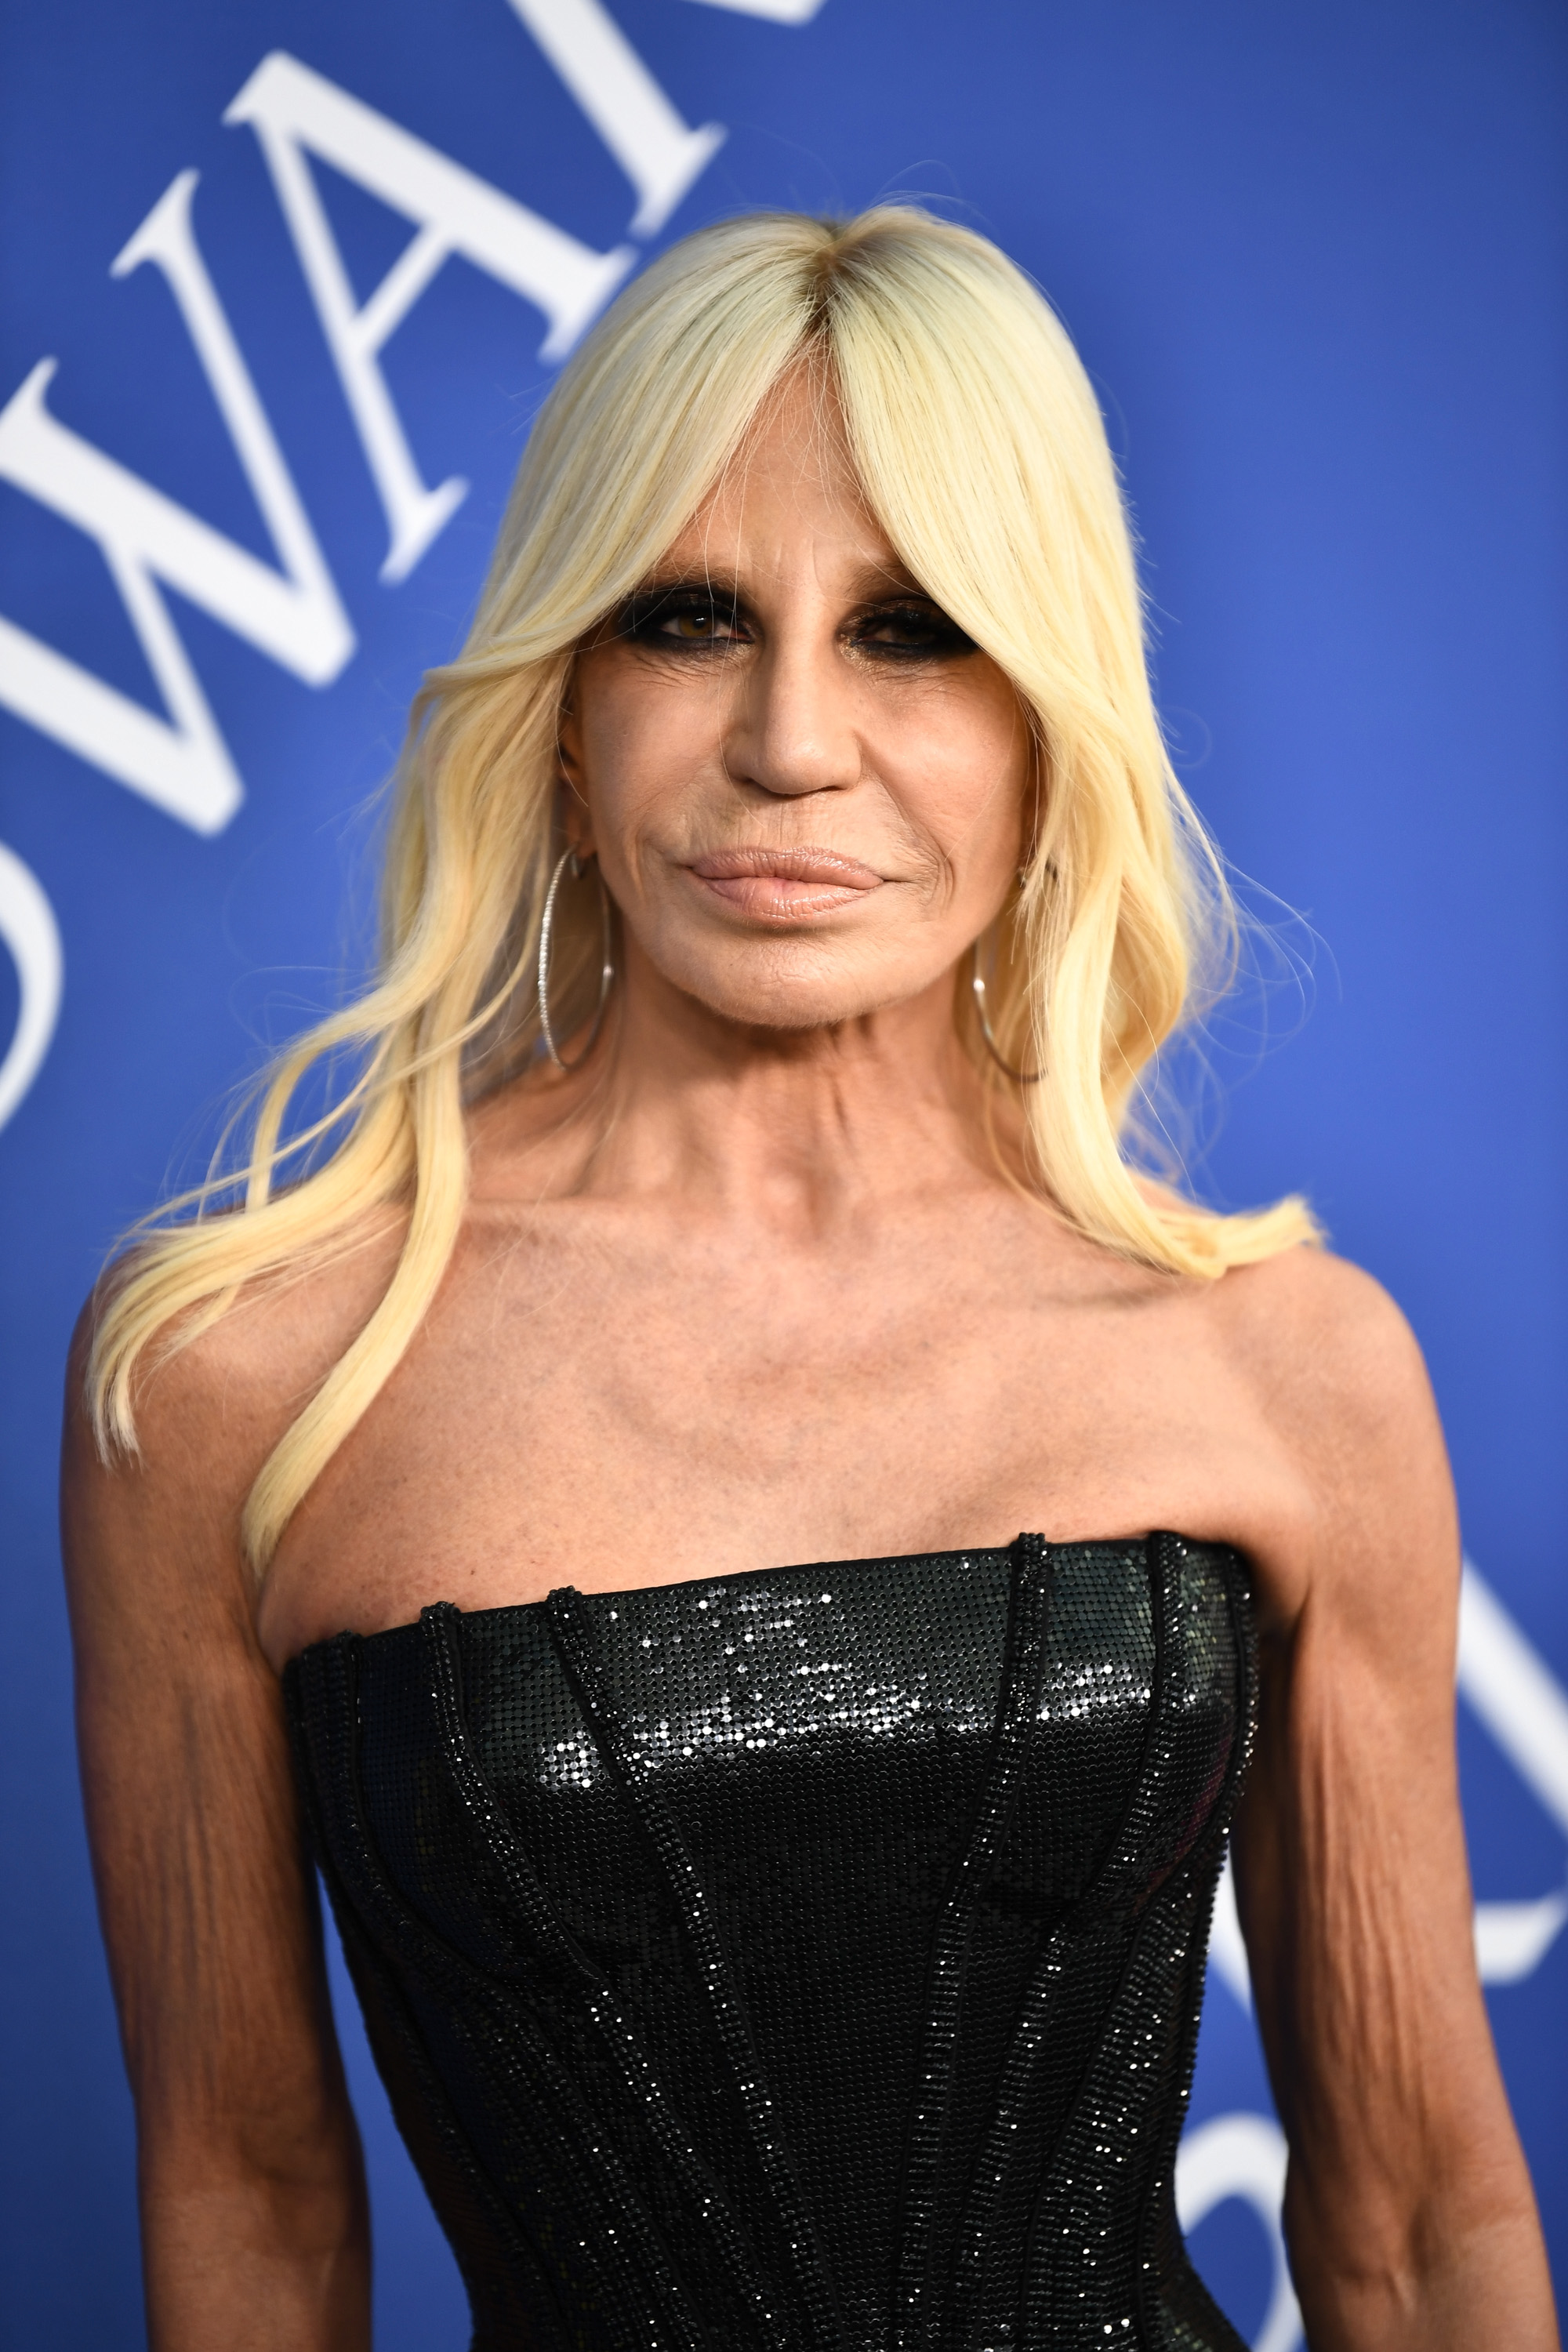 Donatella Versace attends the 2018 CFDA Fashion Awards on June 4, 2018 in New York City | Source: Getty Images